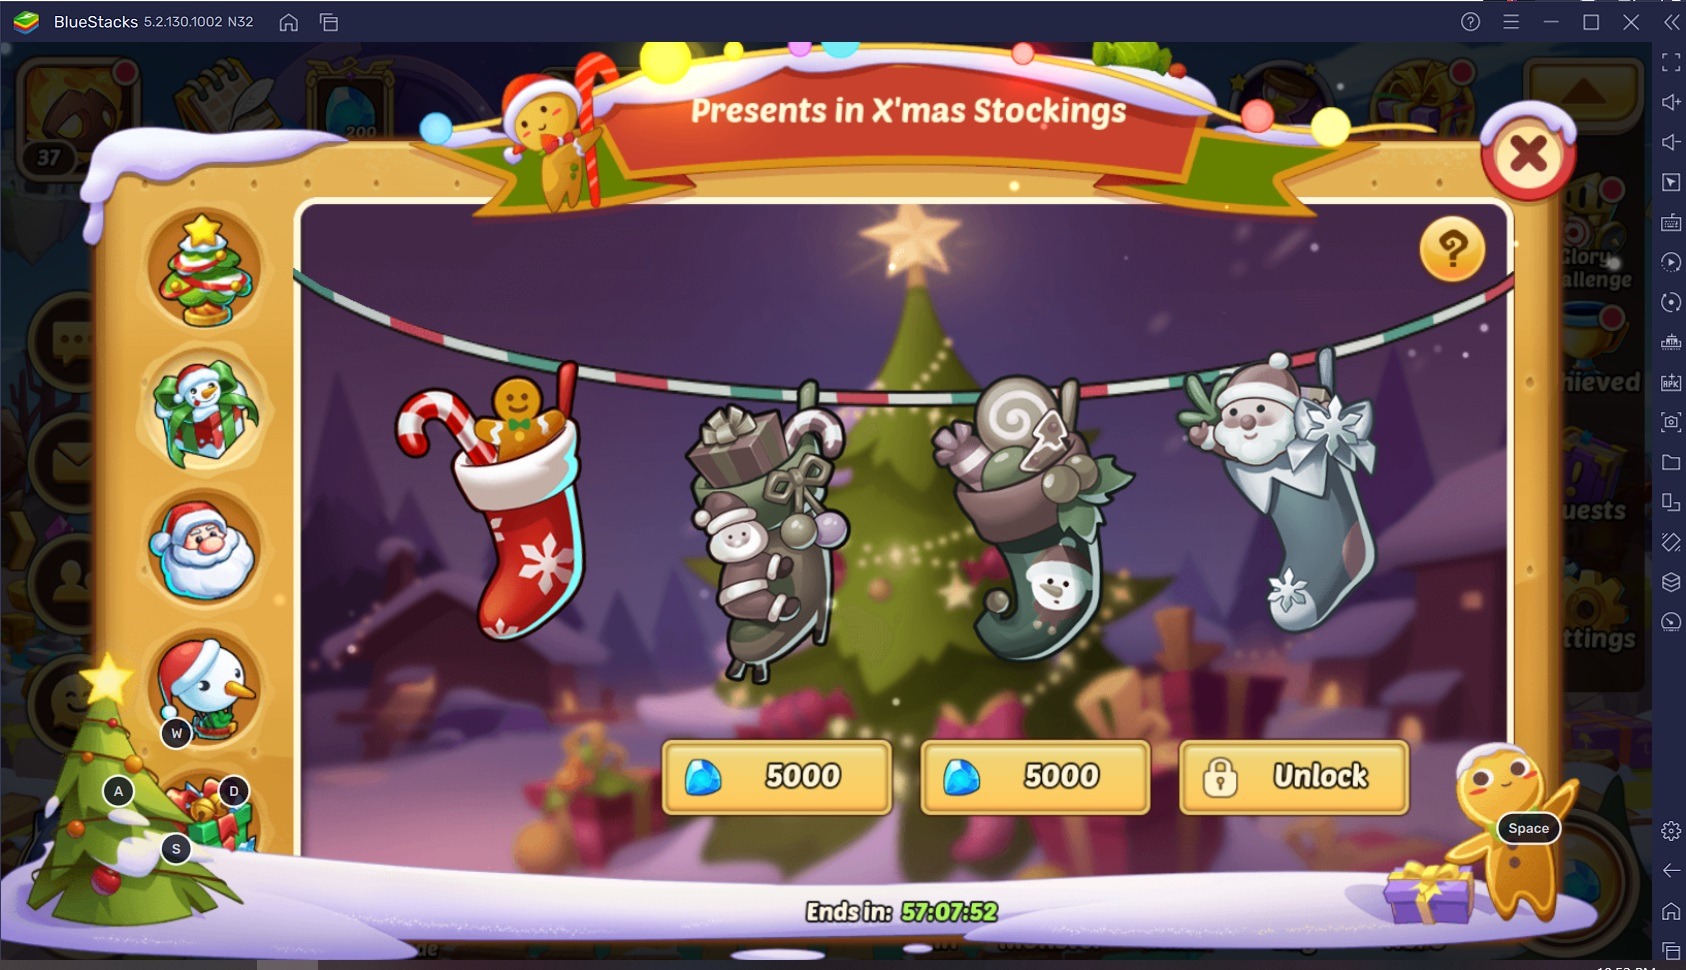 Idle Heroes More Christmas Events are Added in the Idle Continent